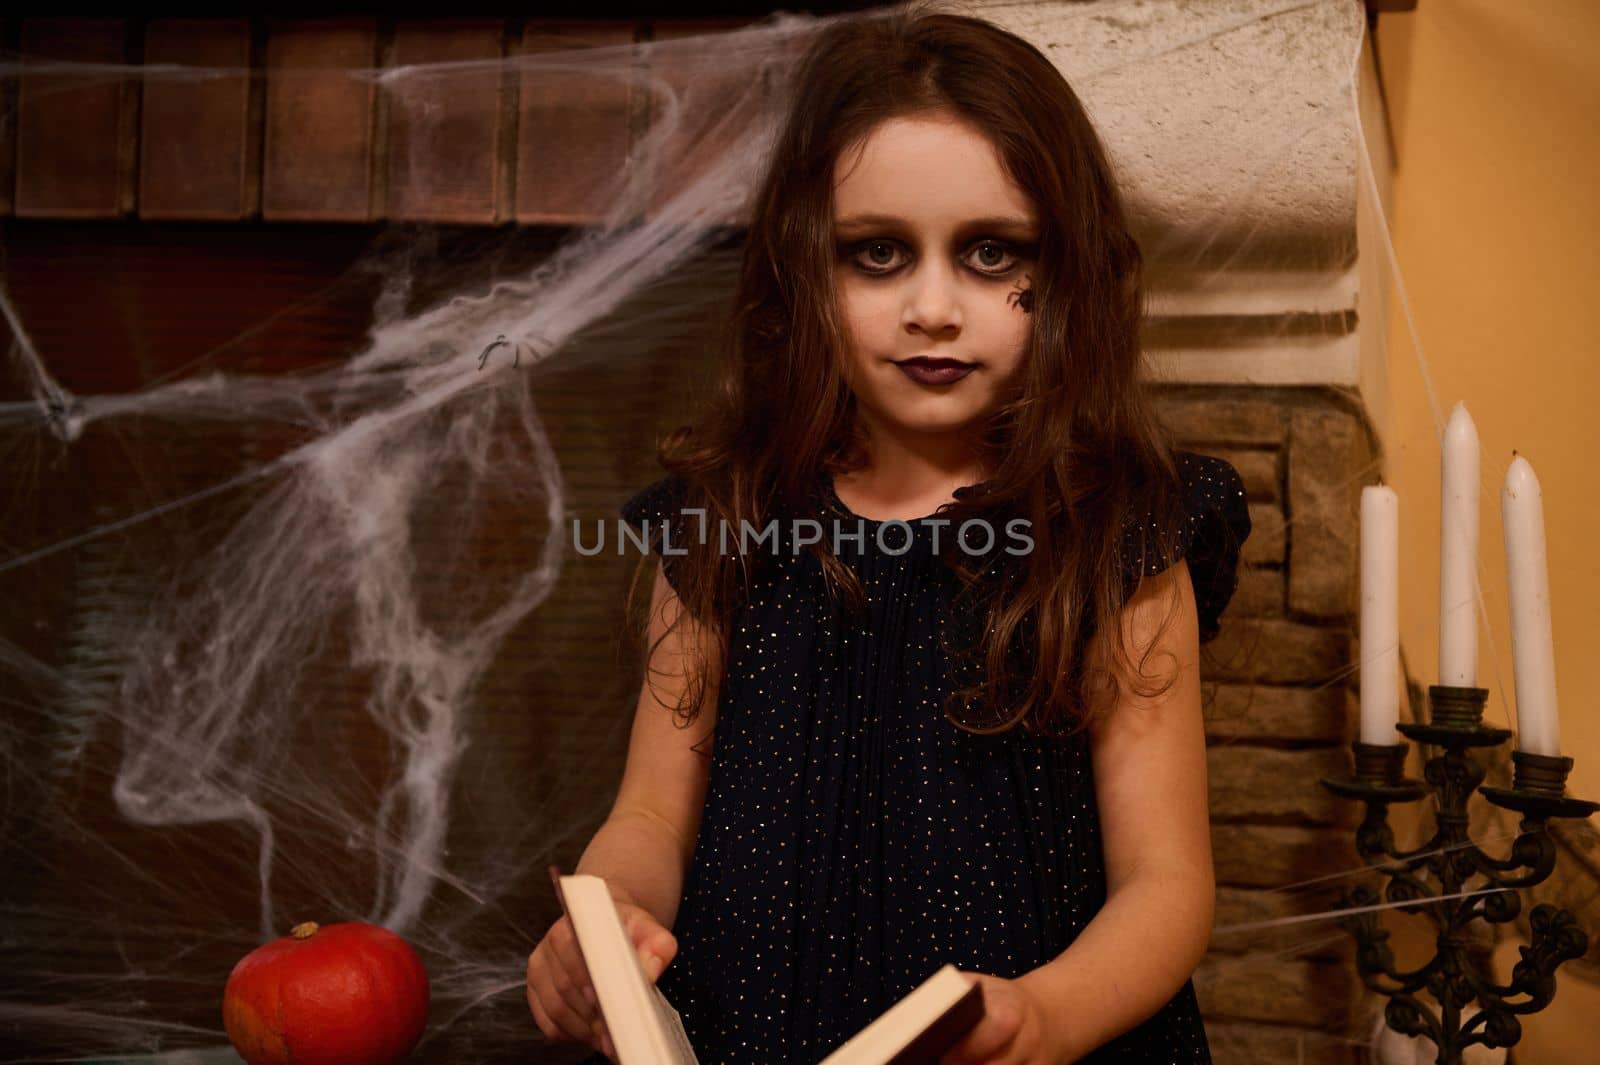 Caucasian gothic child with a spider paint on her cheek, little girl sorceress, witch, enchantress with a spell book, sits against a cobweb-covered fireplace and pumpkins, looking at camera. Halloween